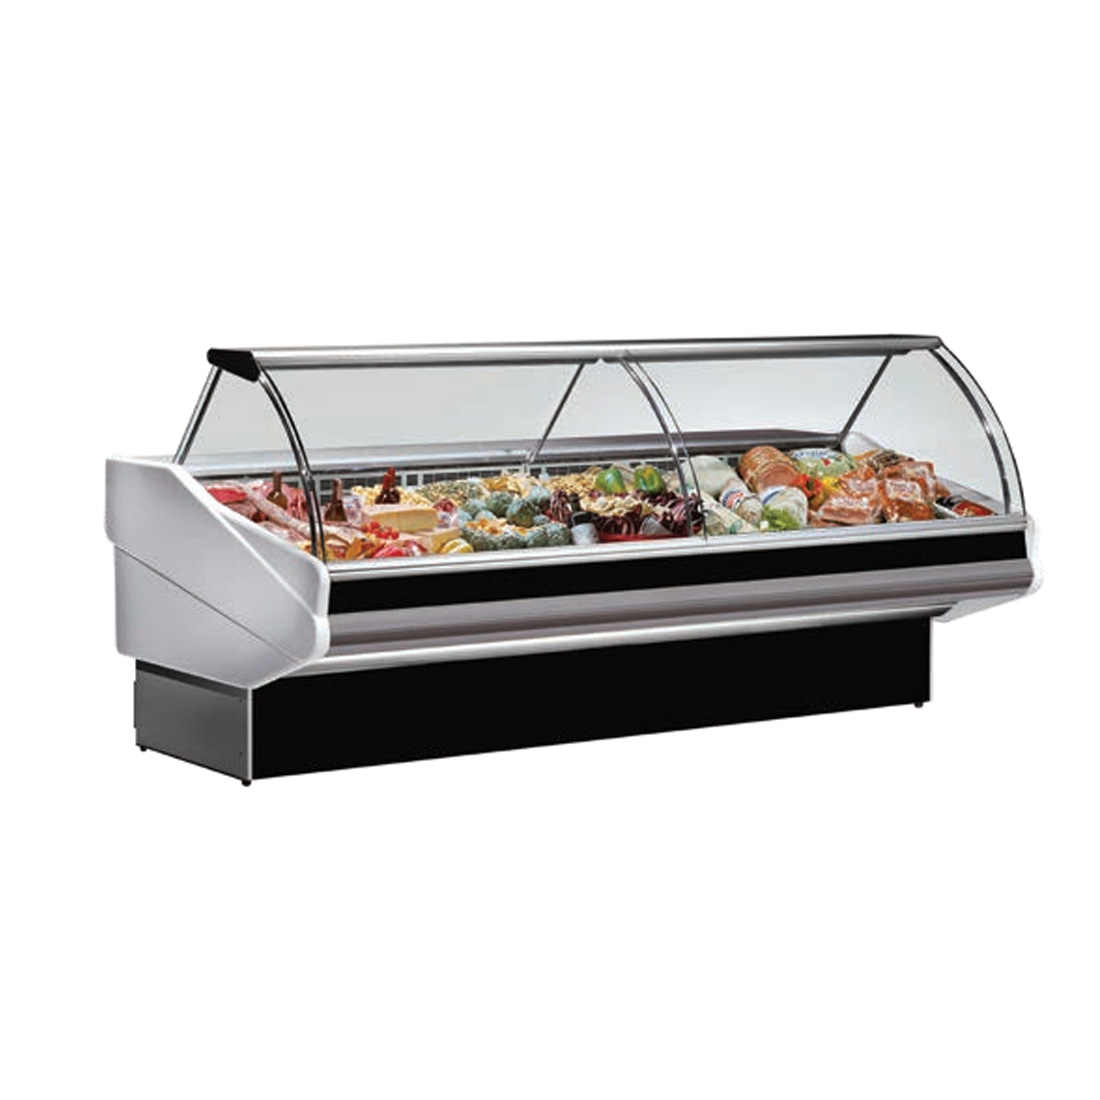 PAN2000 - Curved front glass deli display 2020x1140x1260